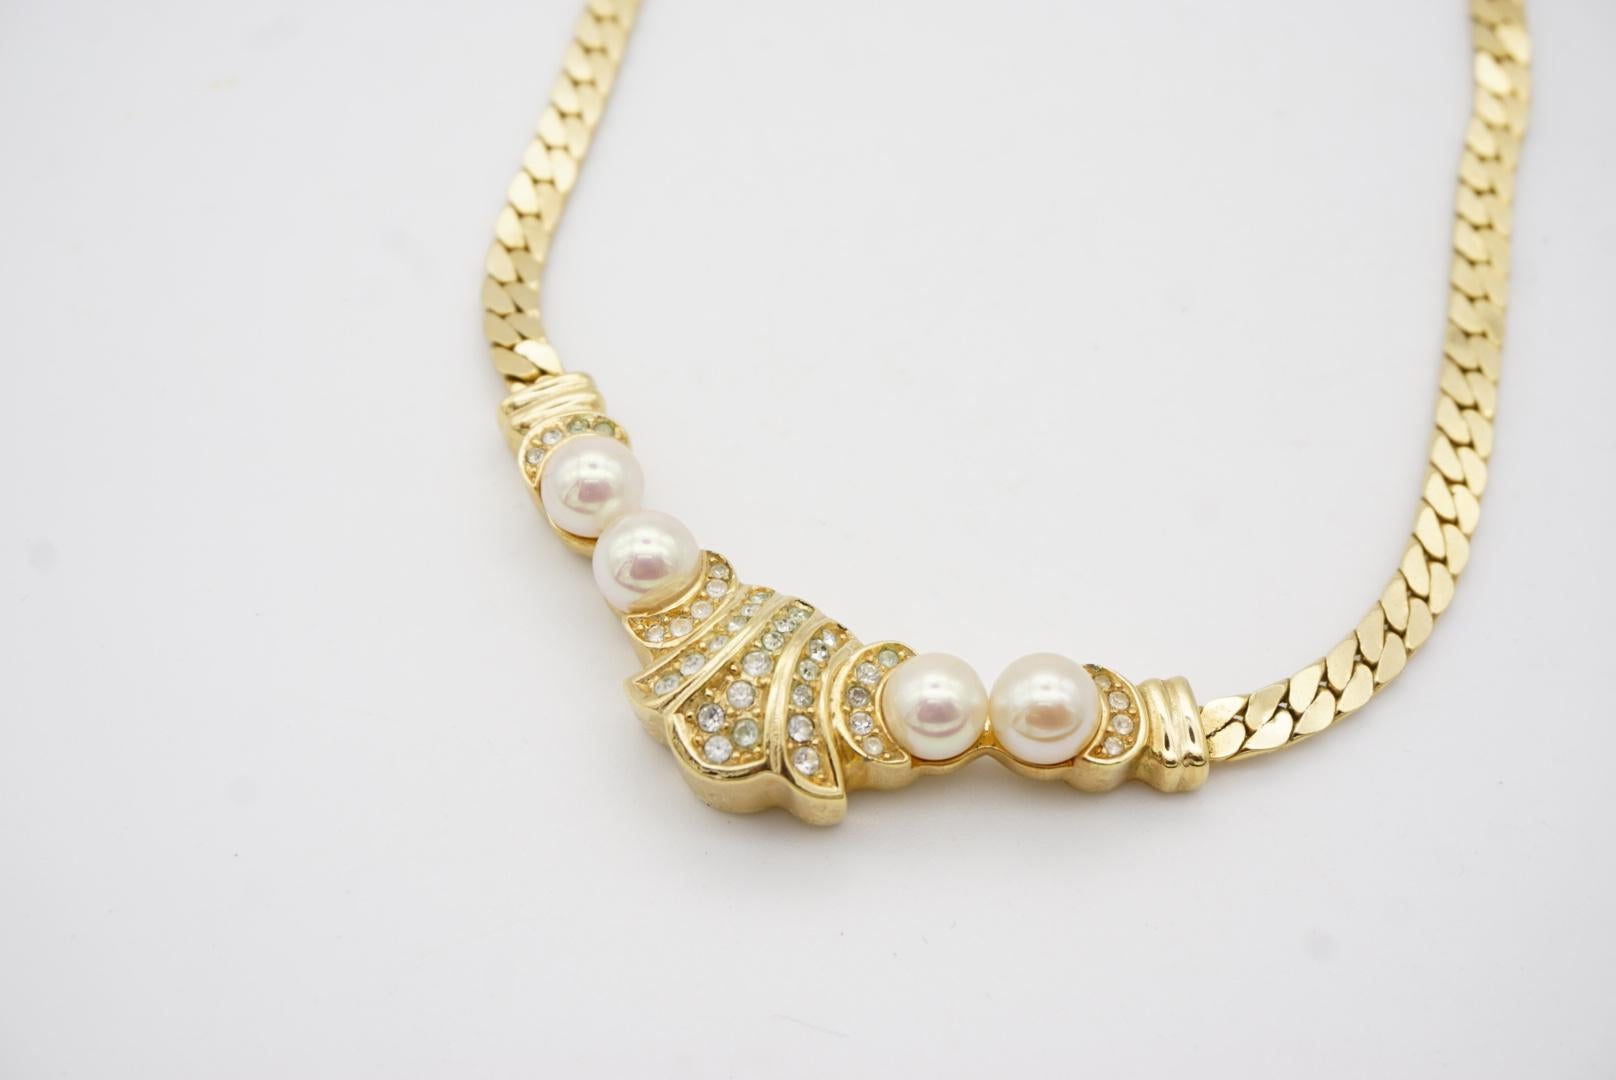 Christian Dior Vintage 1980s Moon Fan Crystals White Pearls Pendant Necklace For Sale 6